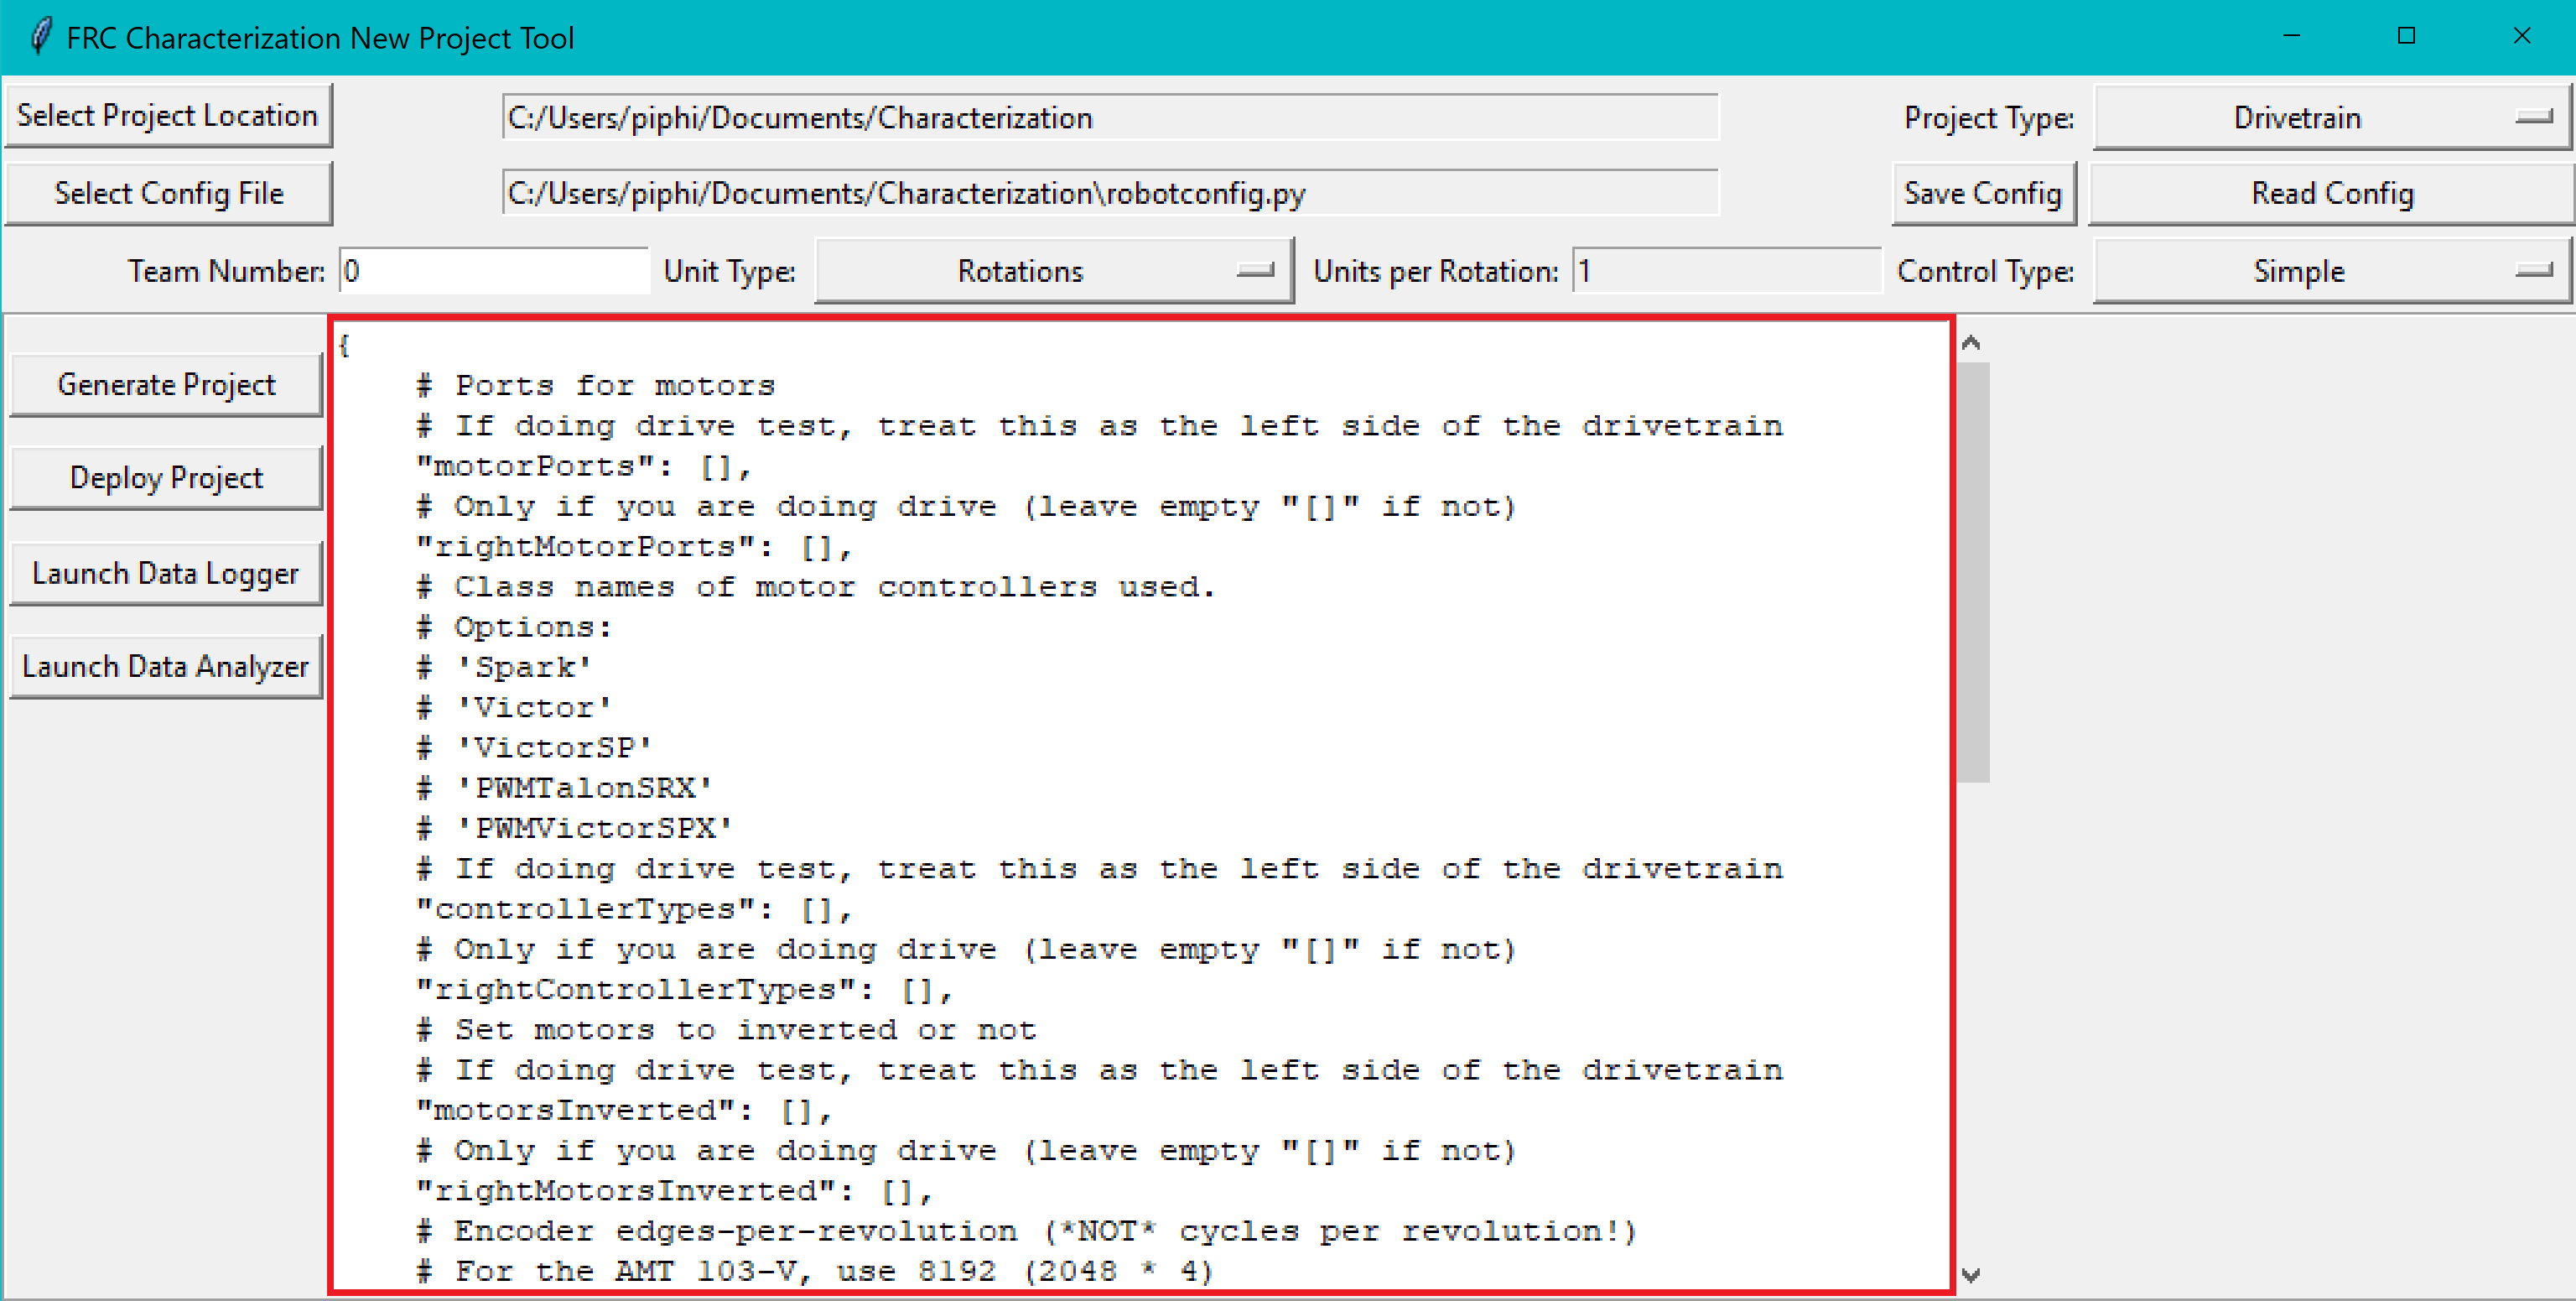 Using the robot characterization configuration editor